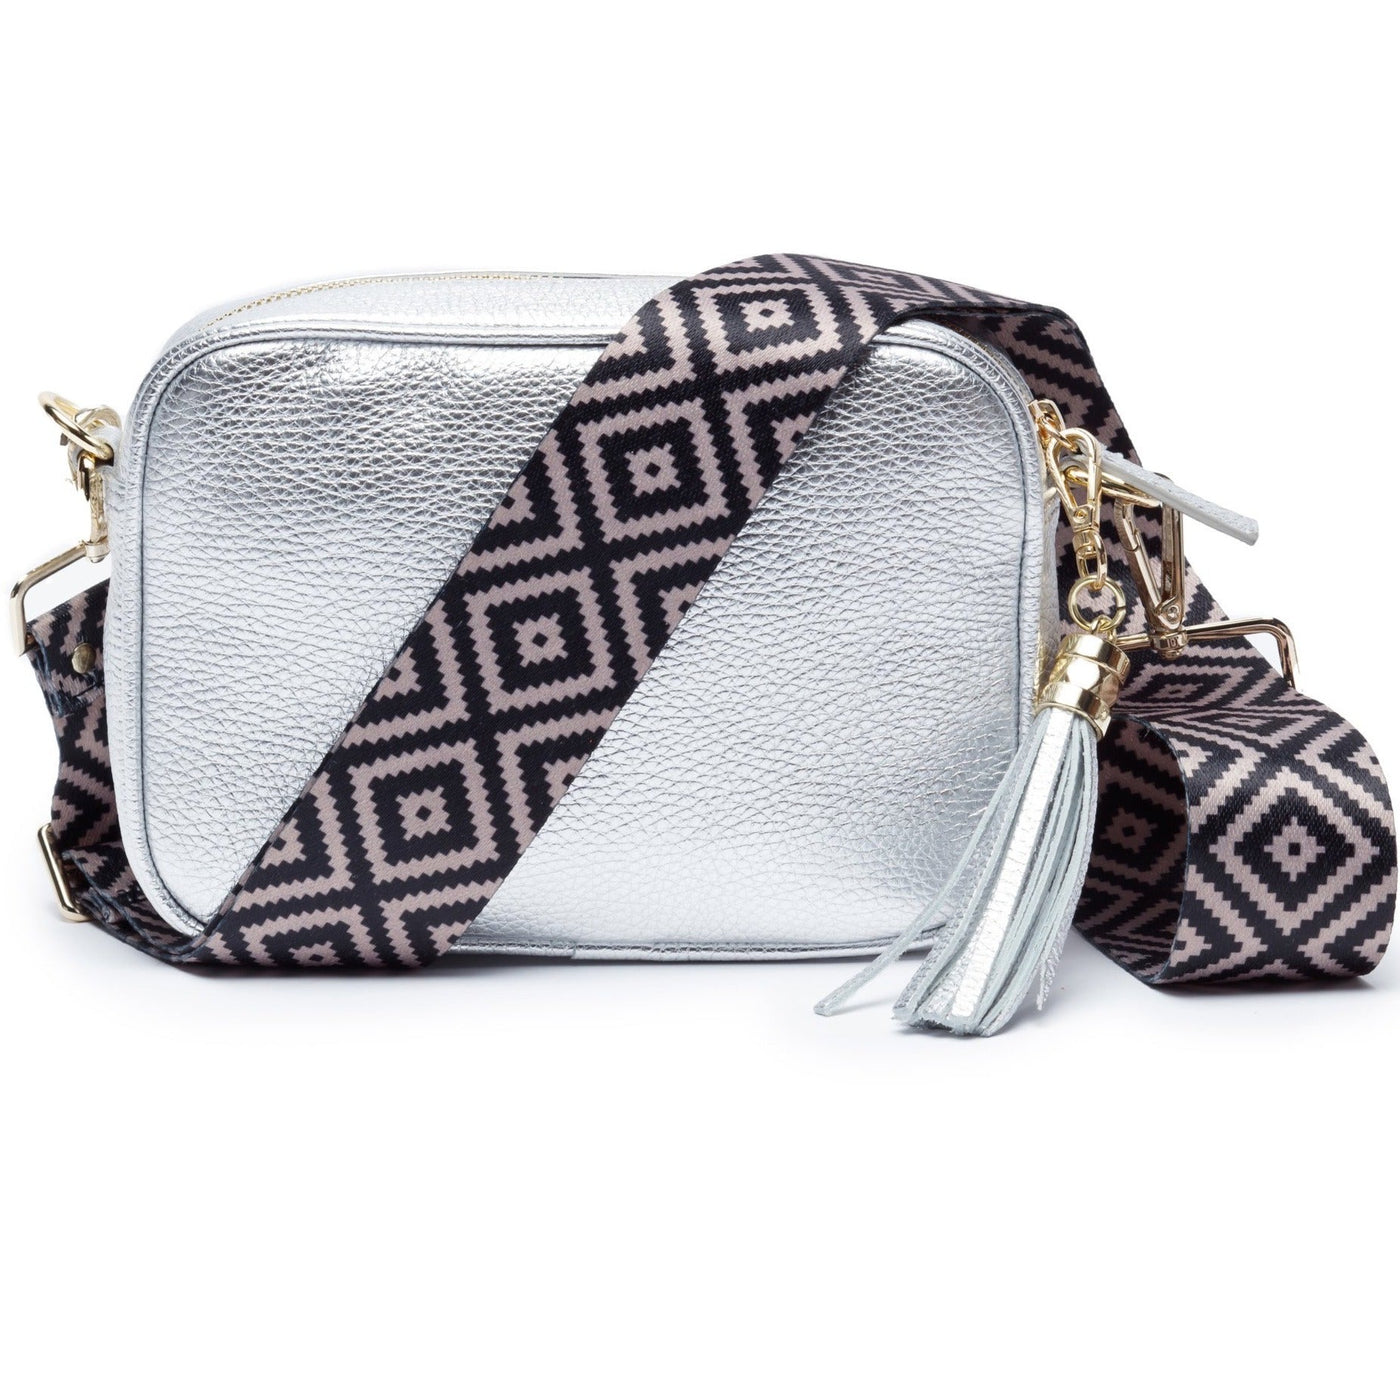 Elie Beaumont Designer Leather Crossbody Bag - Silver (GOLD Fittings)